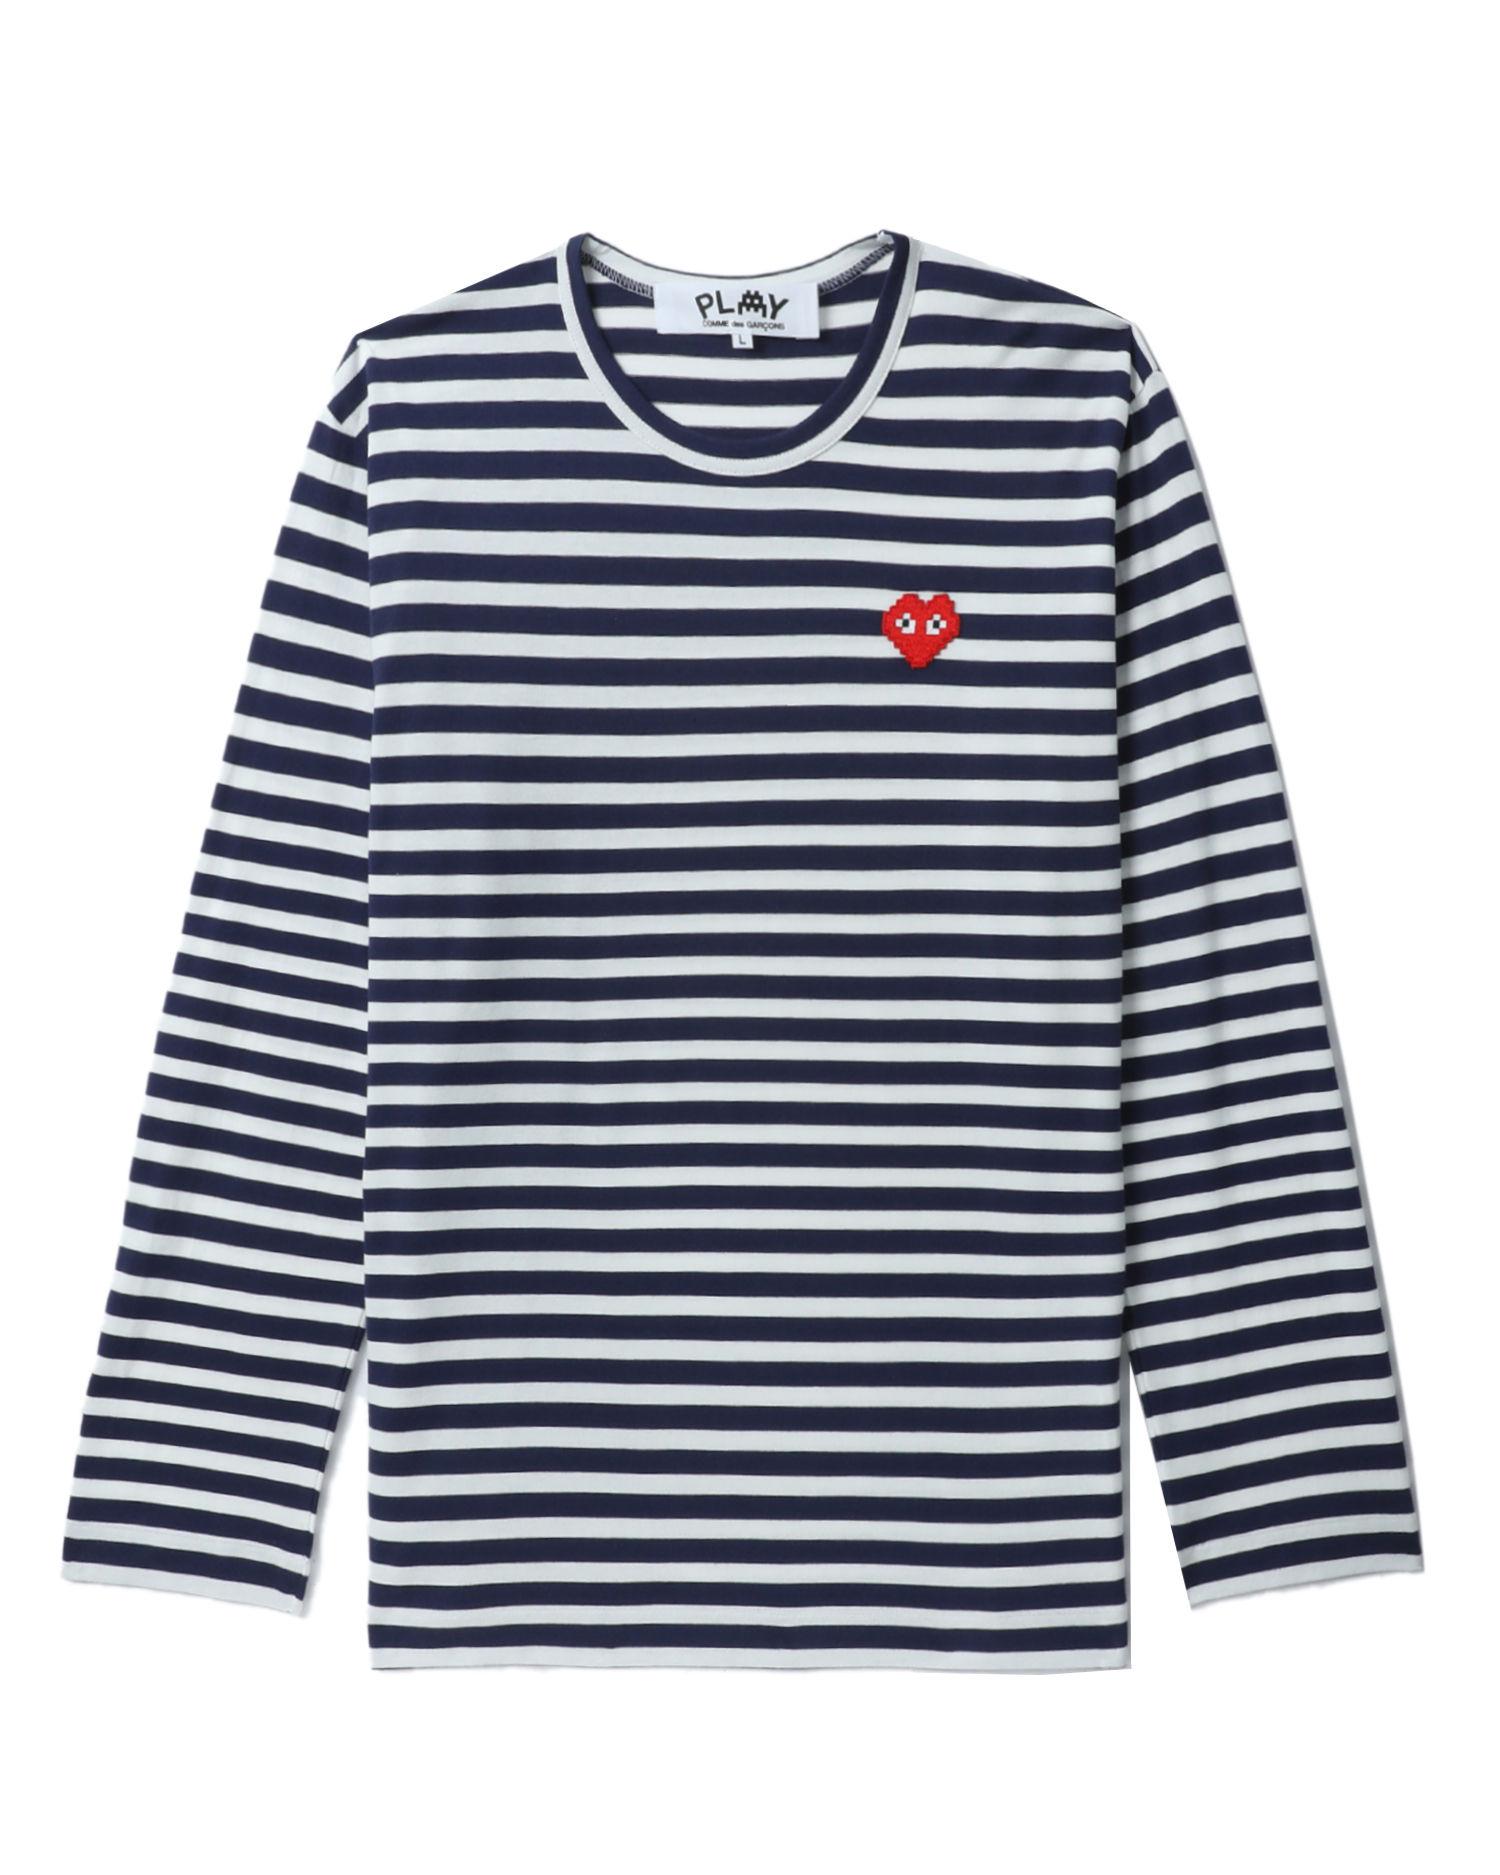 X INVADER striped long sleeve tee by COMME DES GARCONS